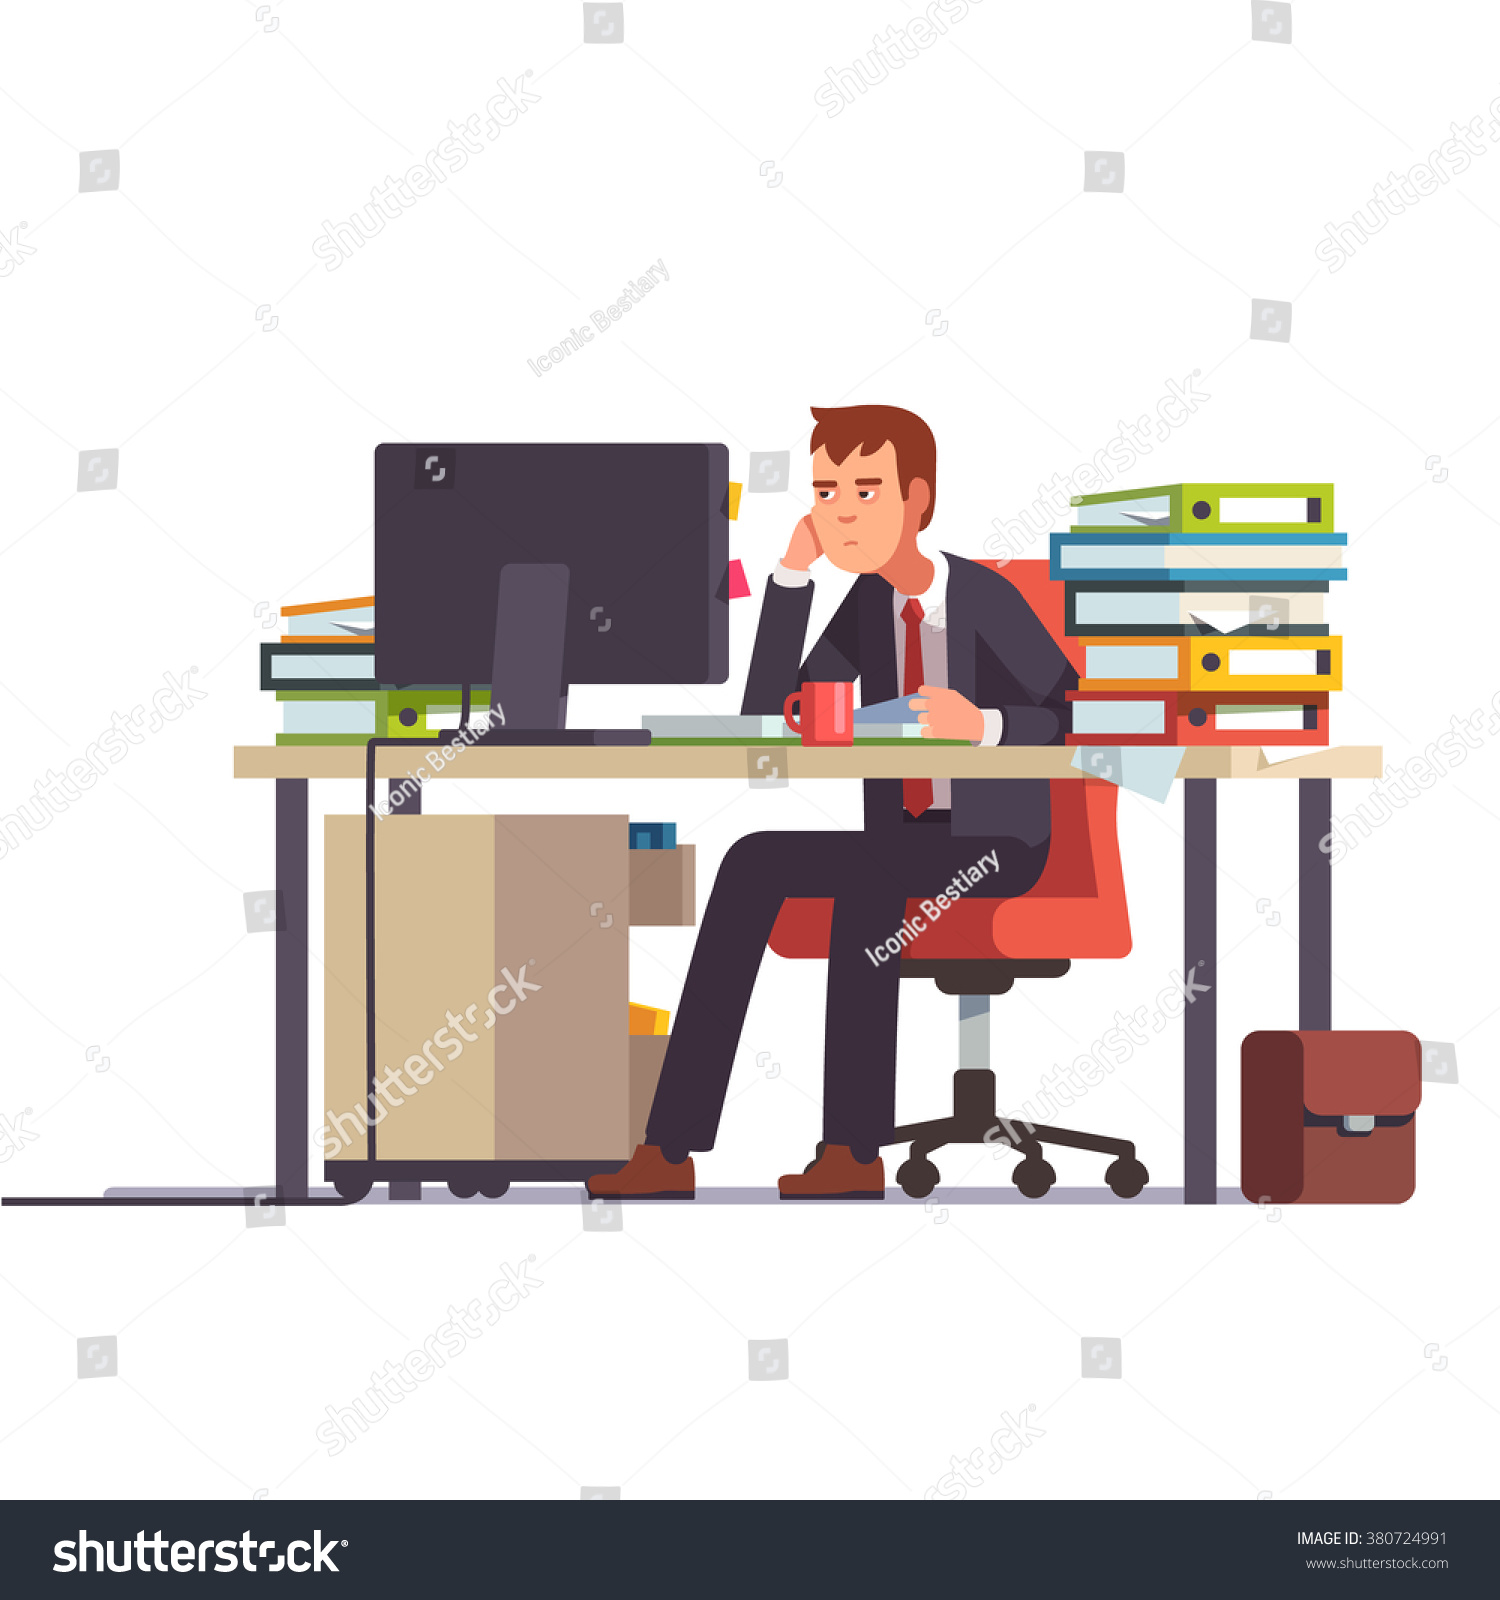 stressed employee clipart - photo #39